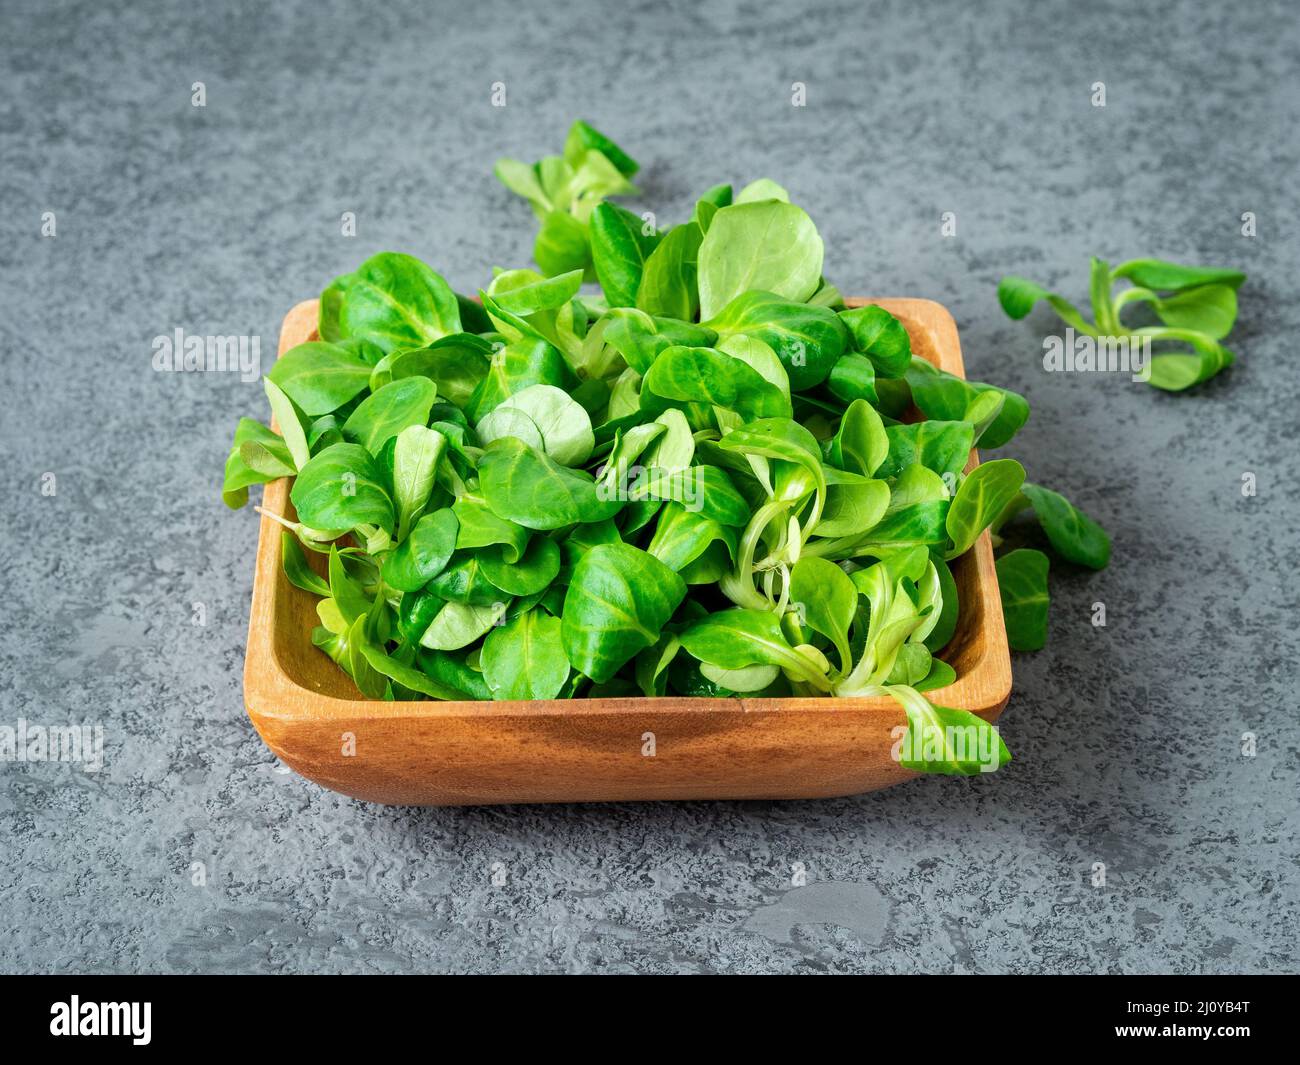 Wooden bowl with corn salad leaves, lamb's lettuce on gray stone background, side view. Stock Photo